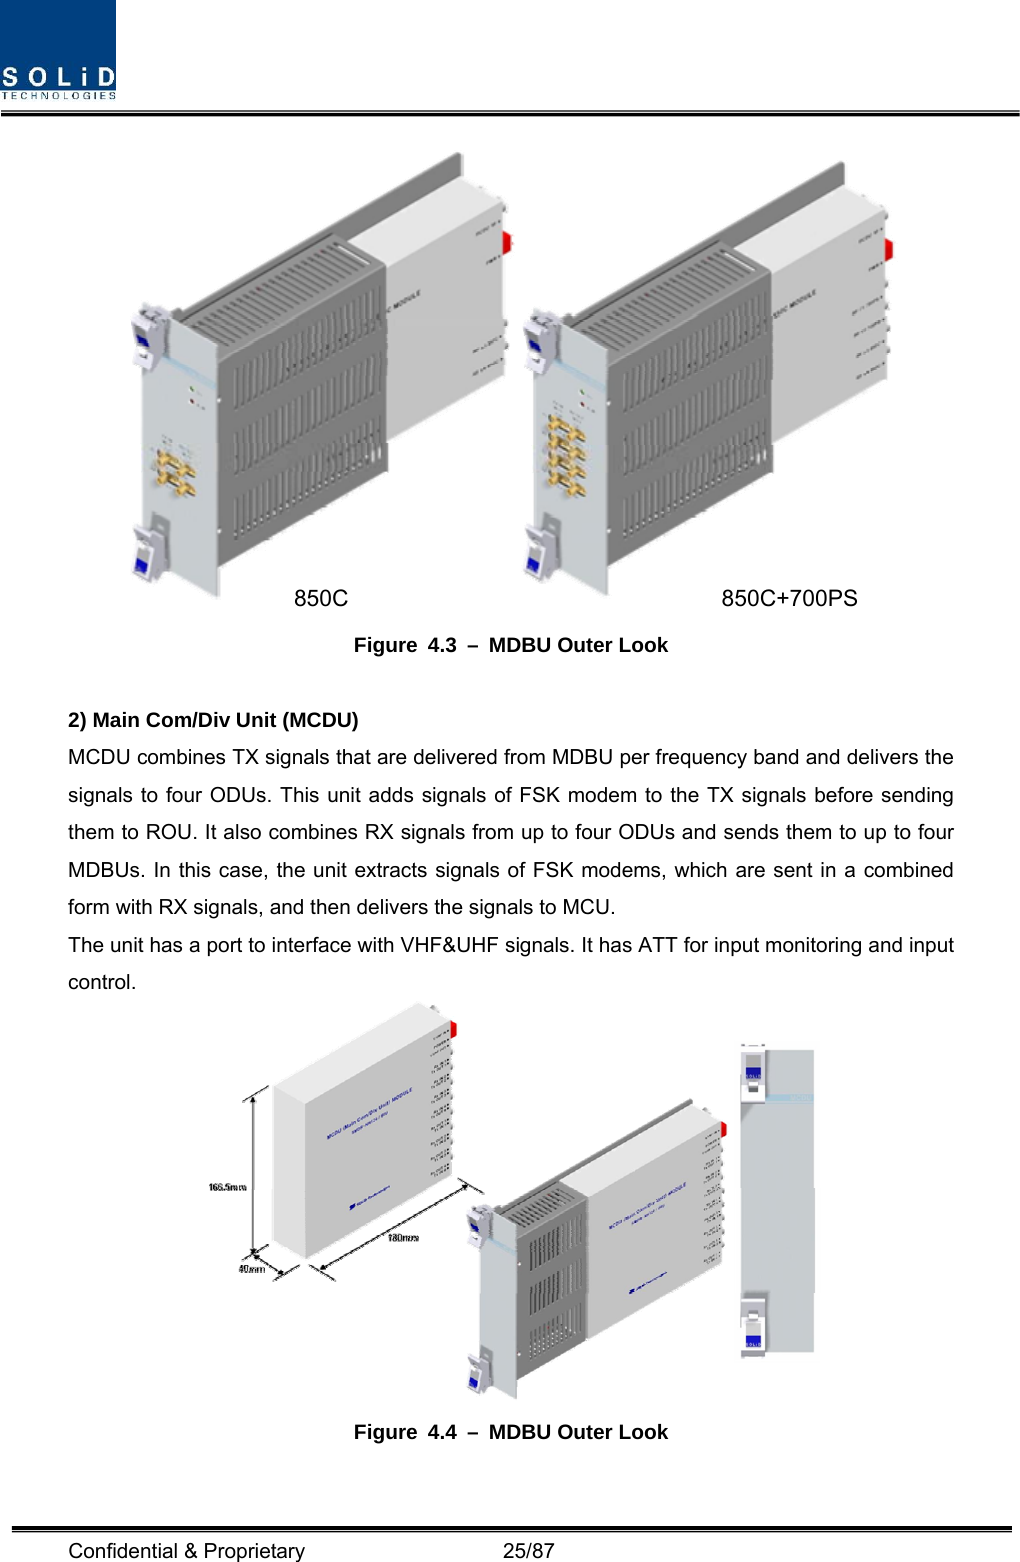  Confidential &amp; Proprietary                   25/87  Figure 4.3 – MDBU Outer Look  2) Main Com/Div Unit (MCDU) MCDU combines TX signals that are delivered from MDBU per frequency band and delivers the signals to four ODUs. This unit adds signals of FSK modem to the TX signals before sending them to ROU. It also combines RX signals from up to four ODUs and sends them to up to four MDBUs. In this case, the unit extracts signals of FSK modems, which are sent in a combined form with RX signals, and then delivers the signals to MCU. The unit has a port to interface with VHF&amp;UHF signals. It has ATT for input monitoring and input control.  Figure 4.4 – MDBU Outer Look  850C 850C+700PS 